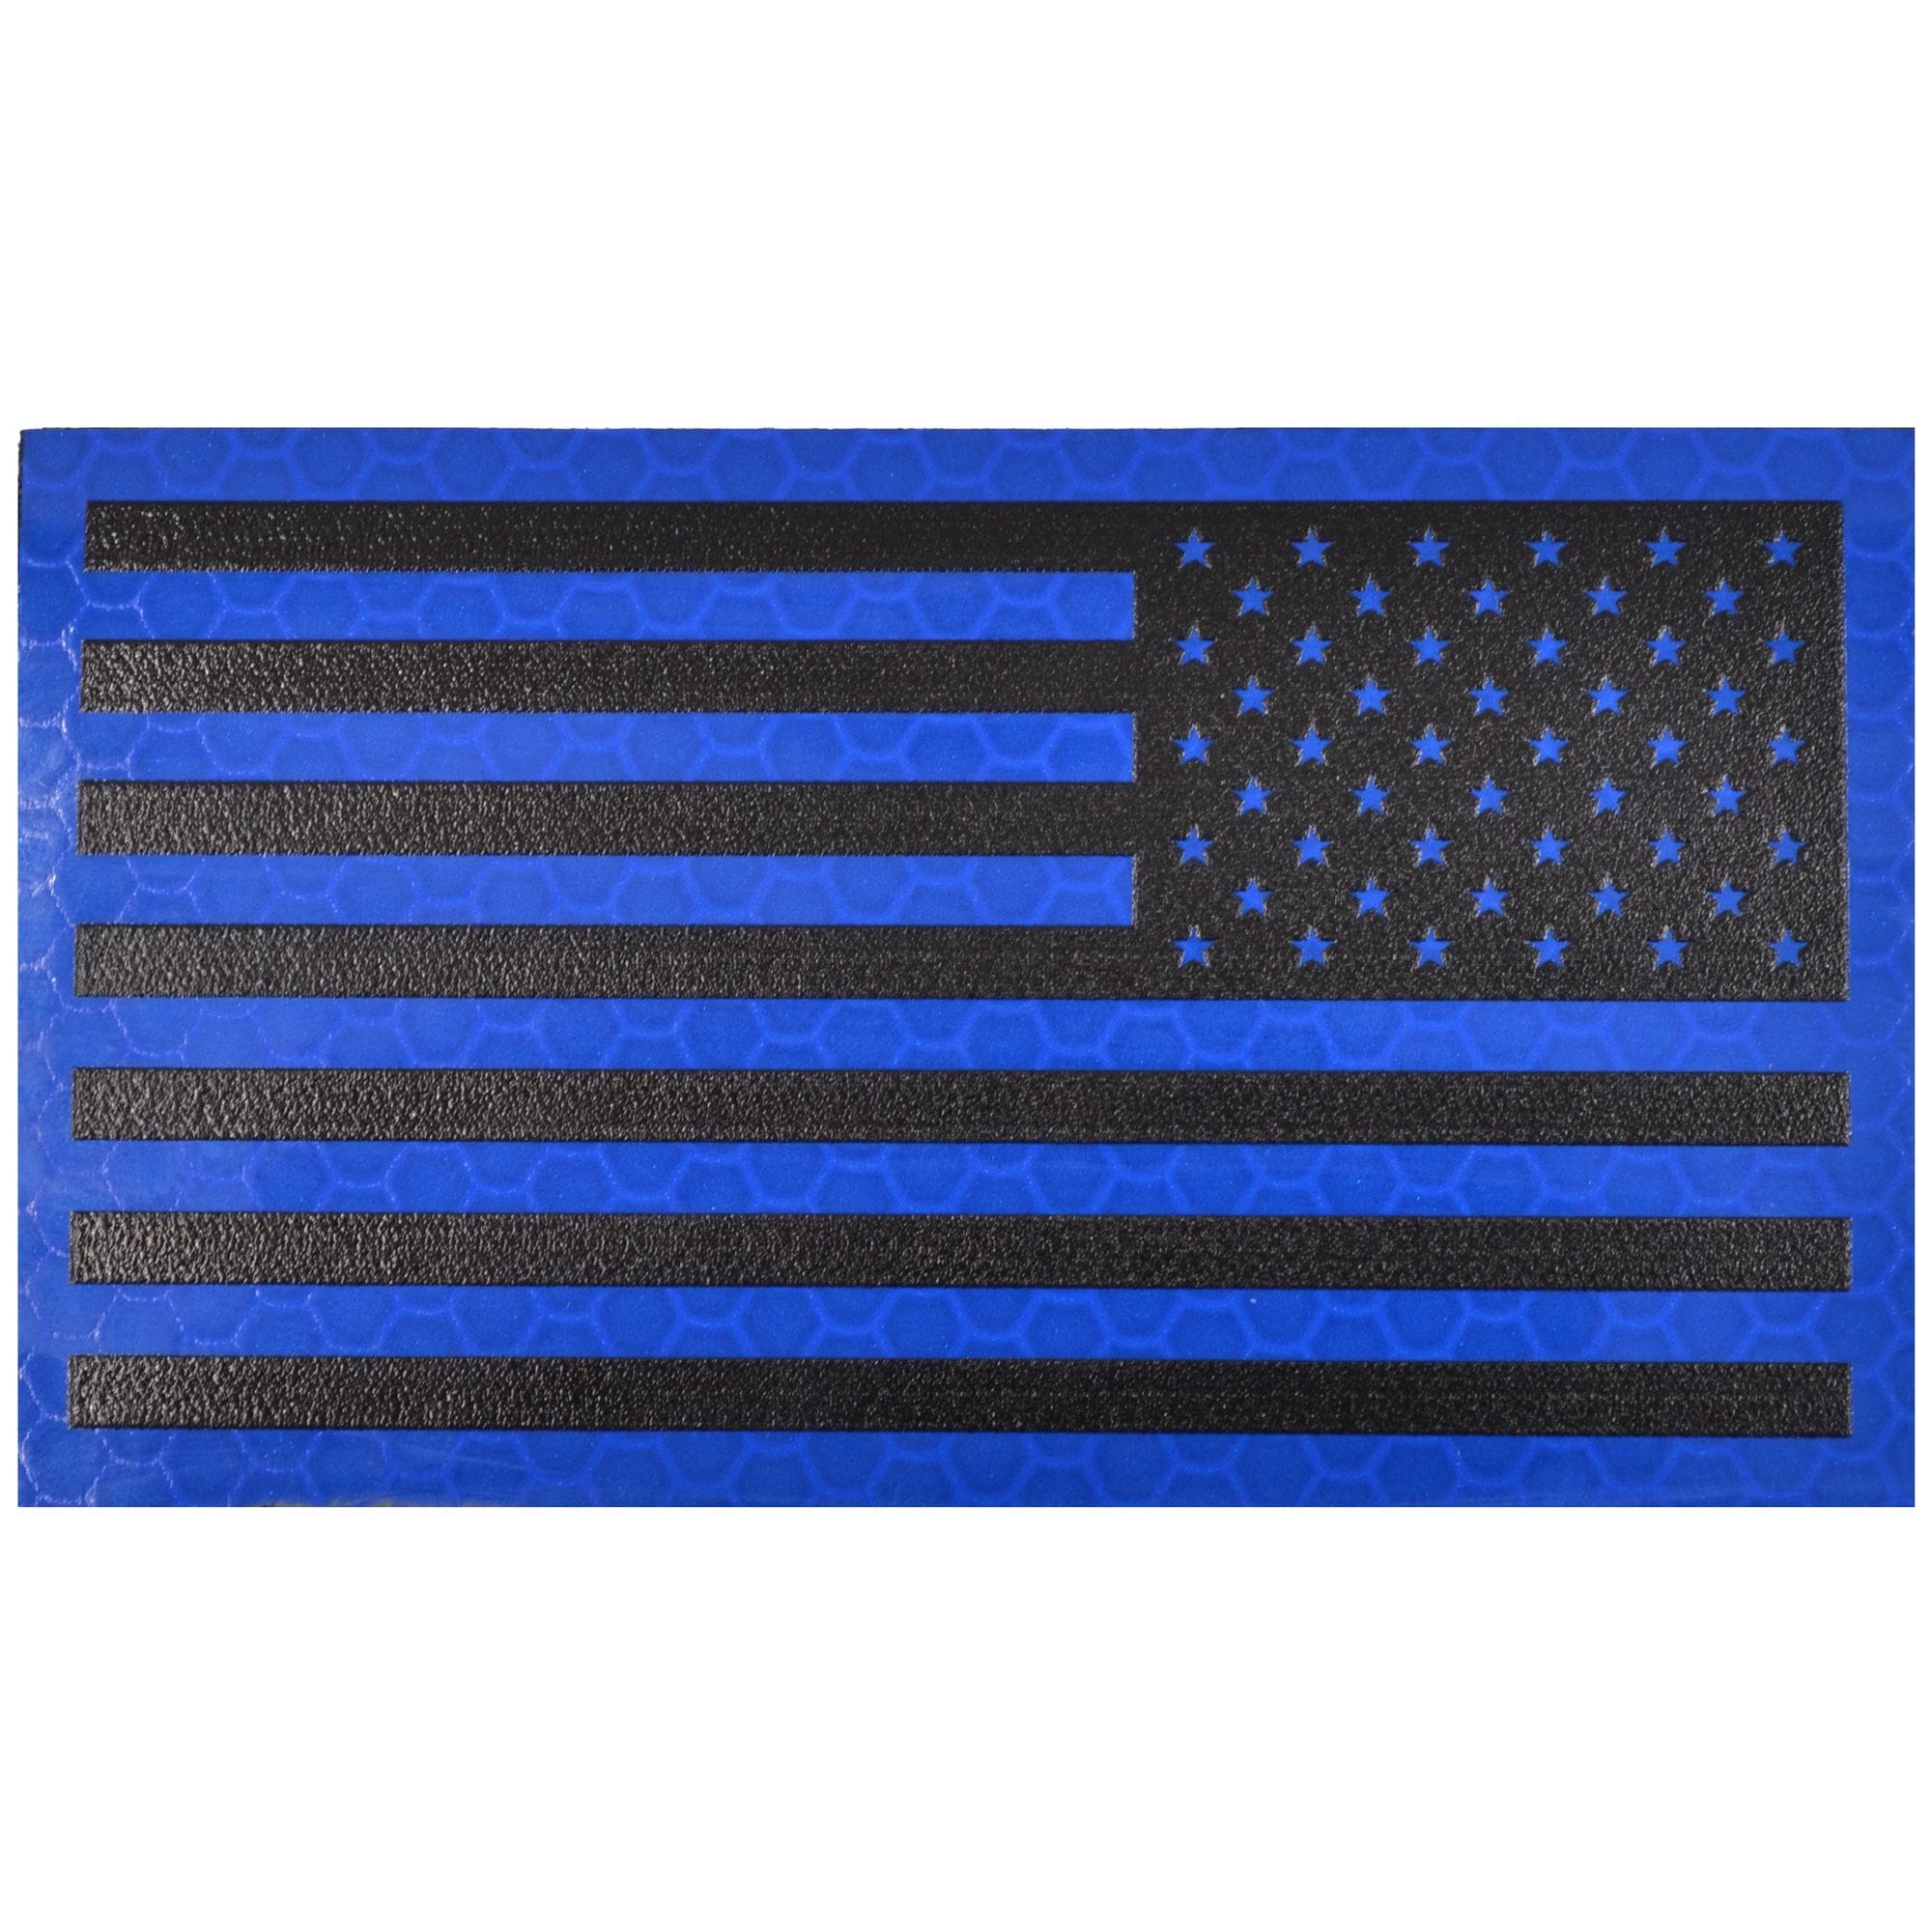 Tactical Gear Junkie Patches Reverse Reflective Printed Blue/Black USA Flag - 2x3.5 Patch